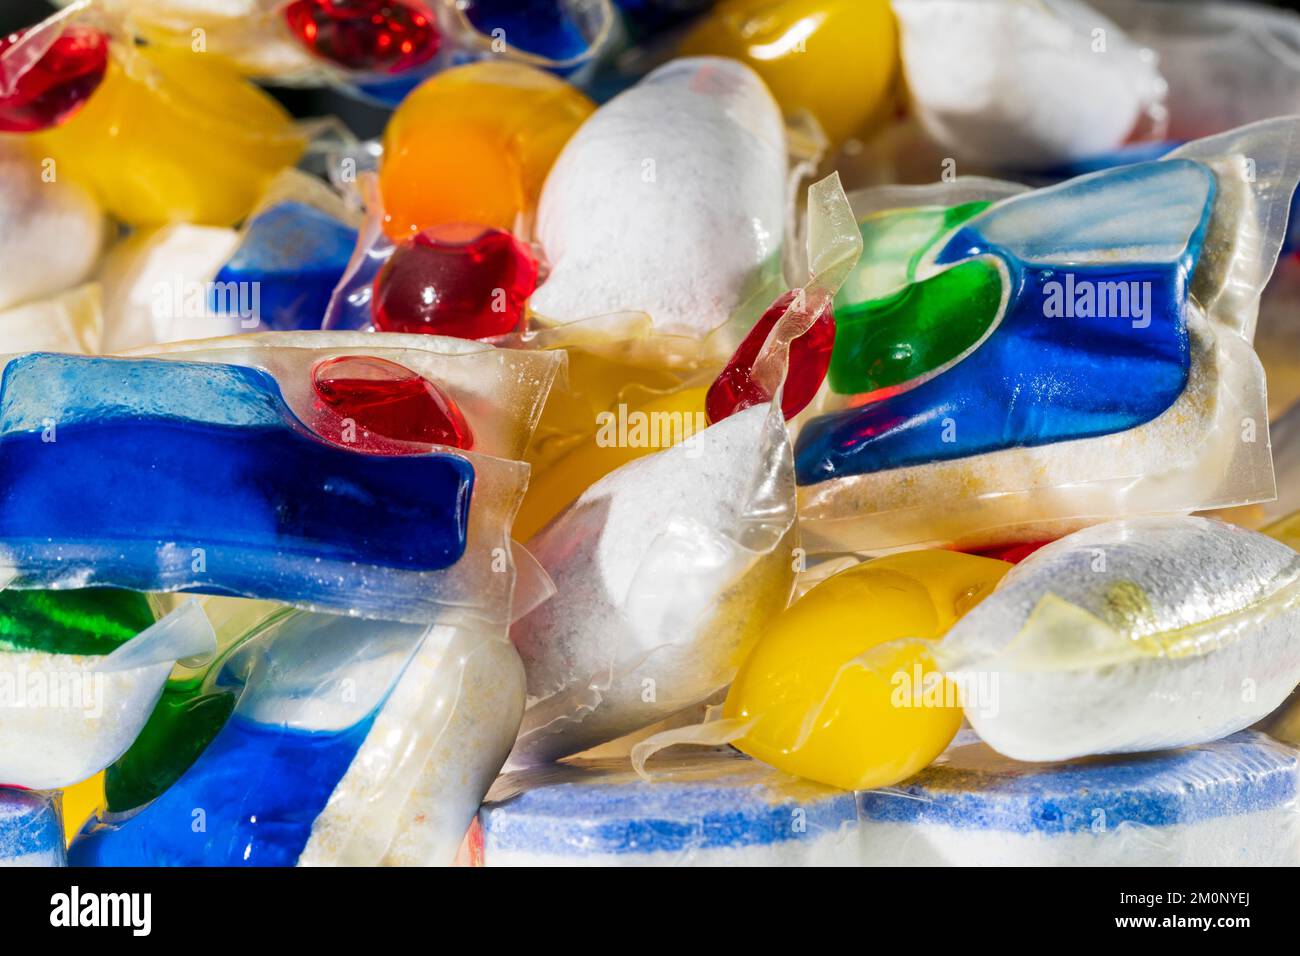 Dishwasher tablets. Close up of various brands, (no brand names showing), of household dishwasher tablets in a pile. Stock Photo